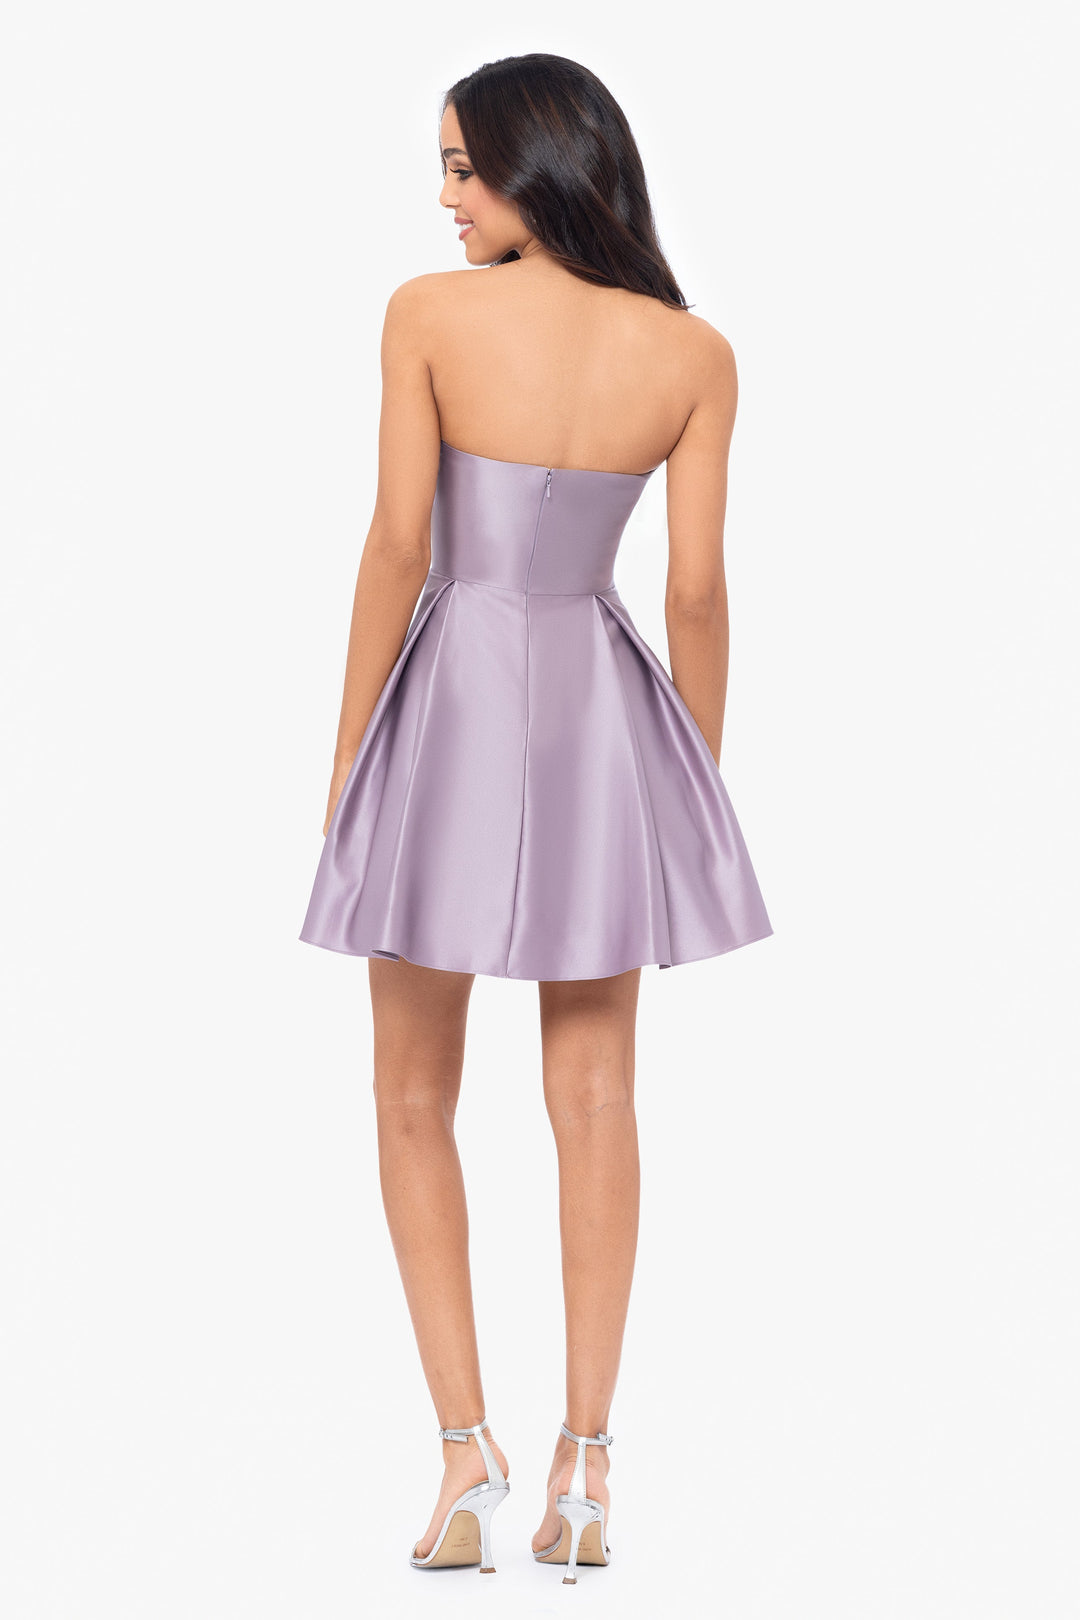 "Milan" Strapless Rouched Party Dress